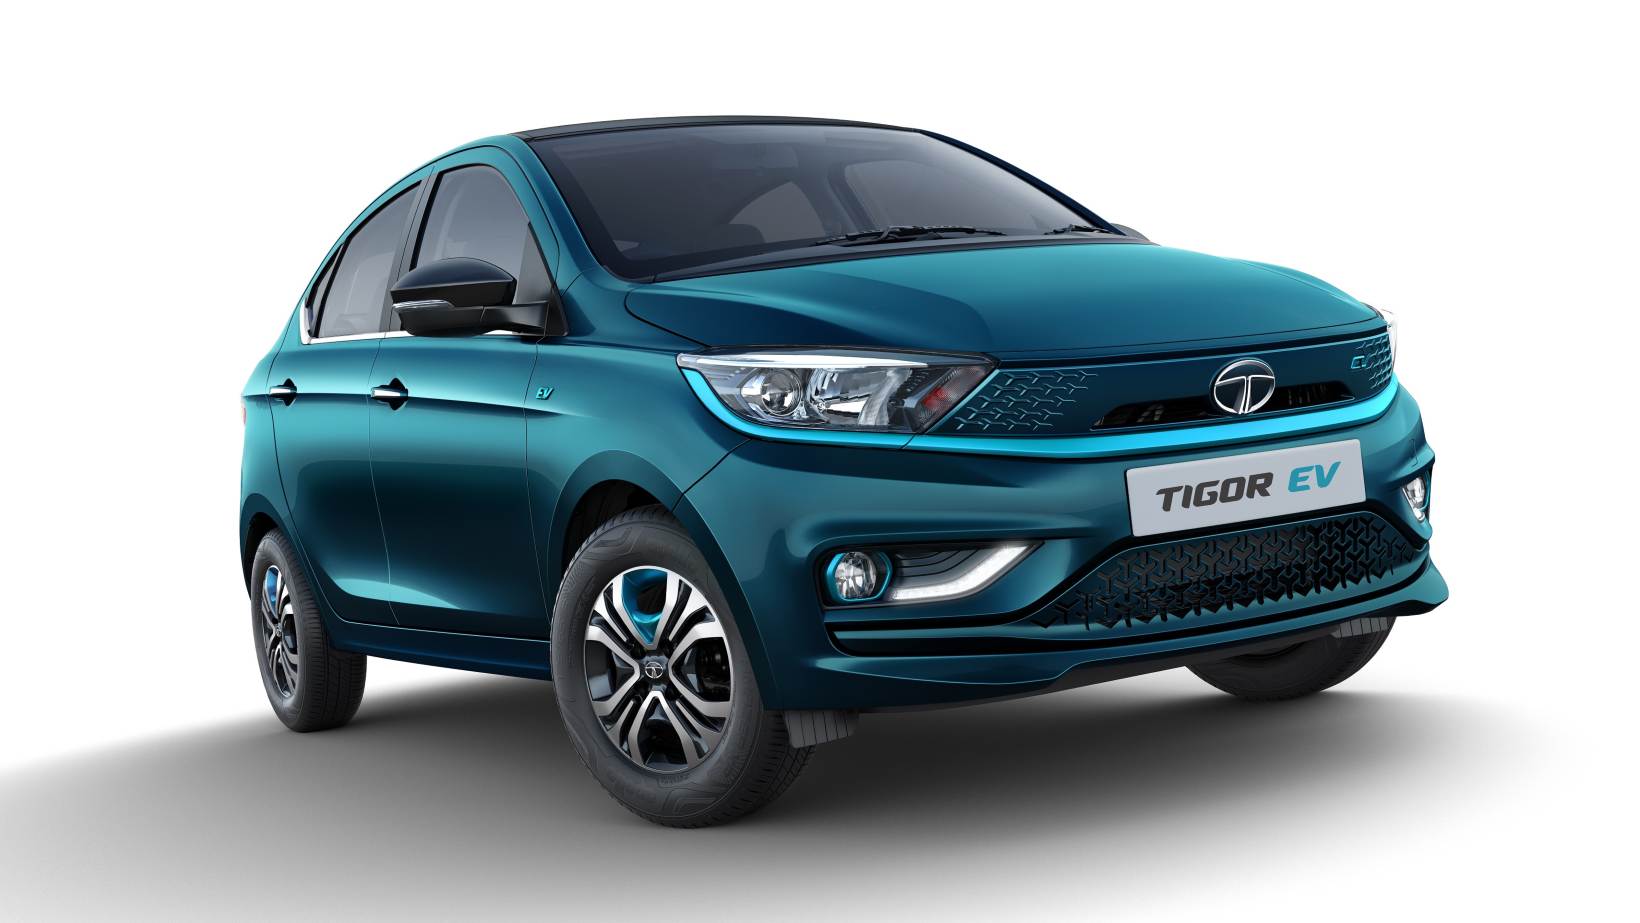 New Tata Tigor EV with Ziptron powertrain previewed ahead of launch, to  have enhanced range and performance- Technology News, Firstpost